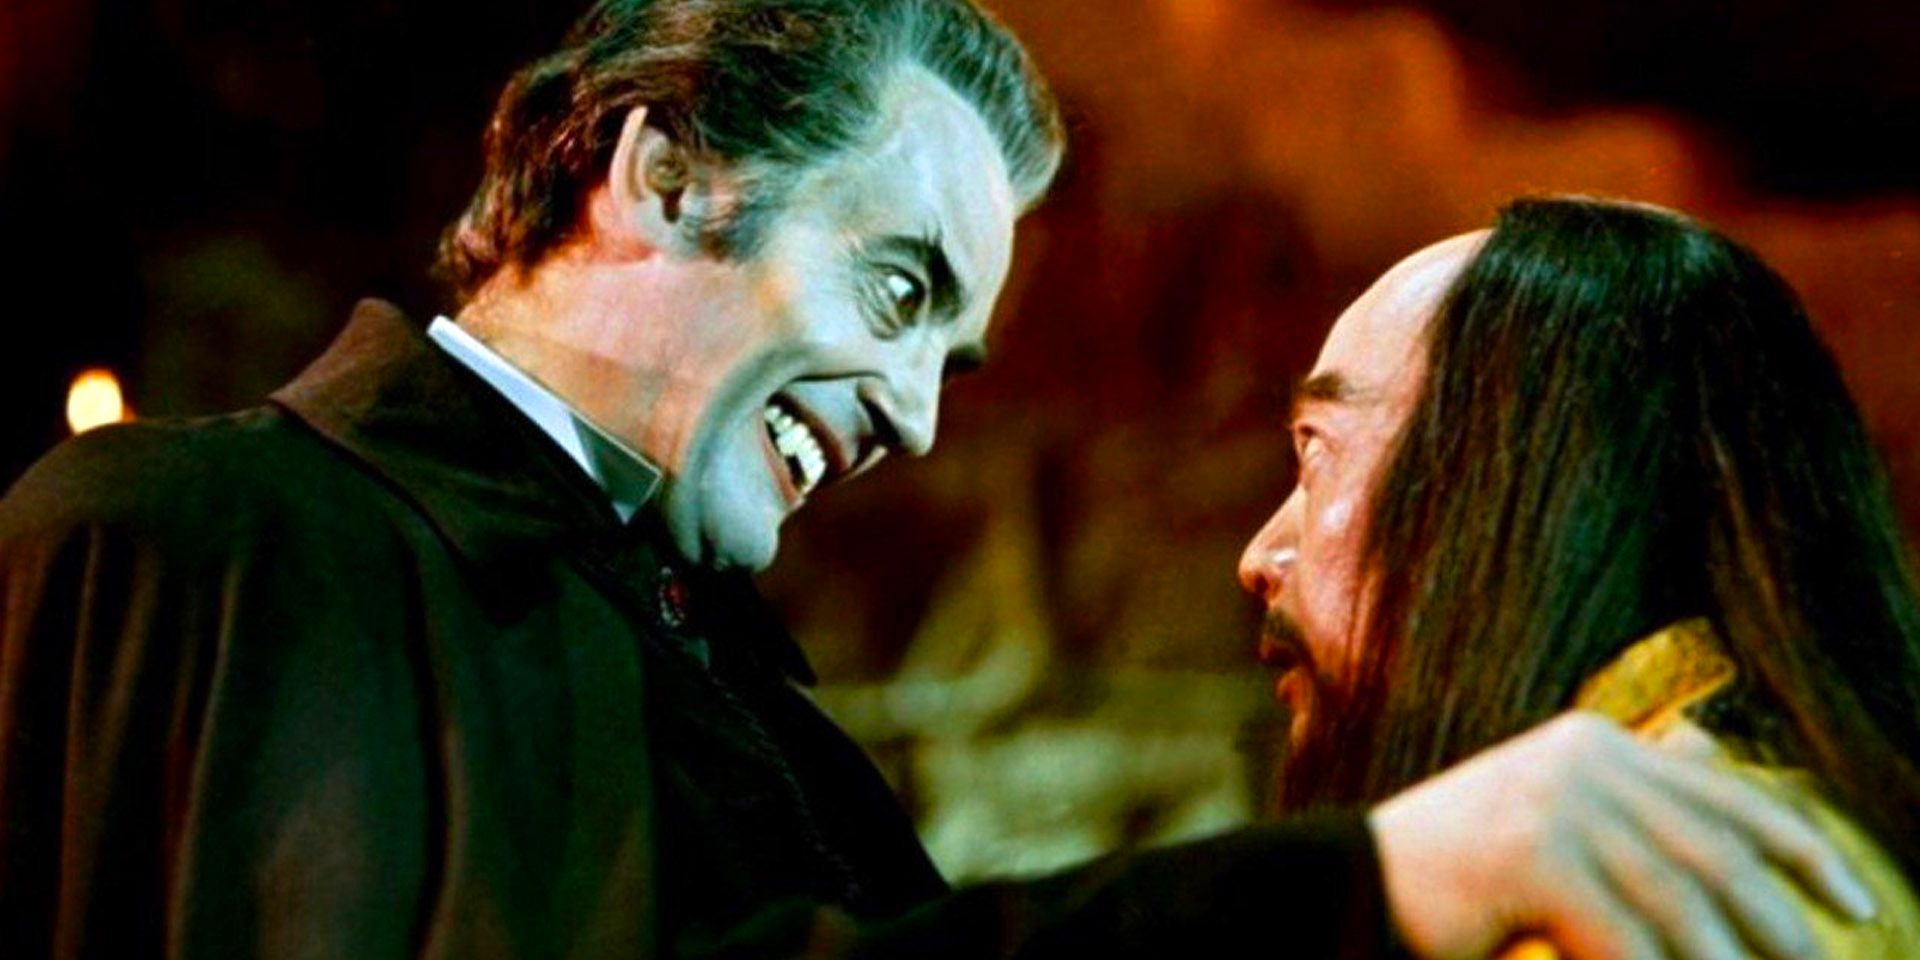 Dracula confronts a kung fu expert in The Legend of the Seven Golden Vampires